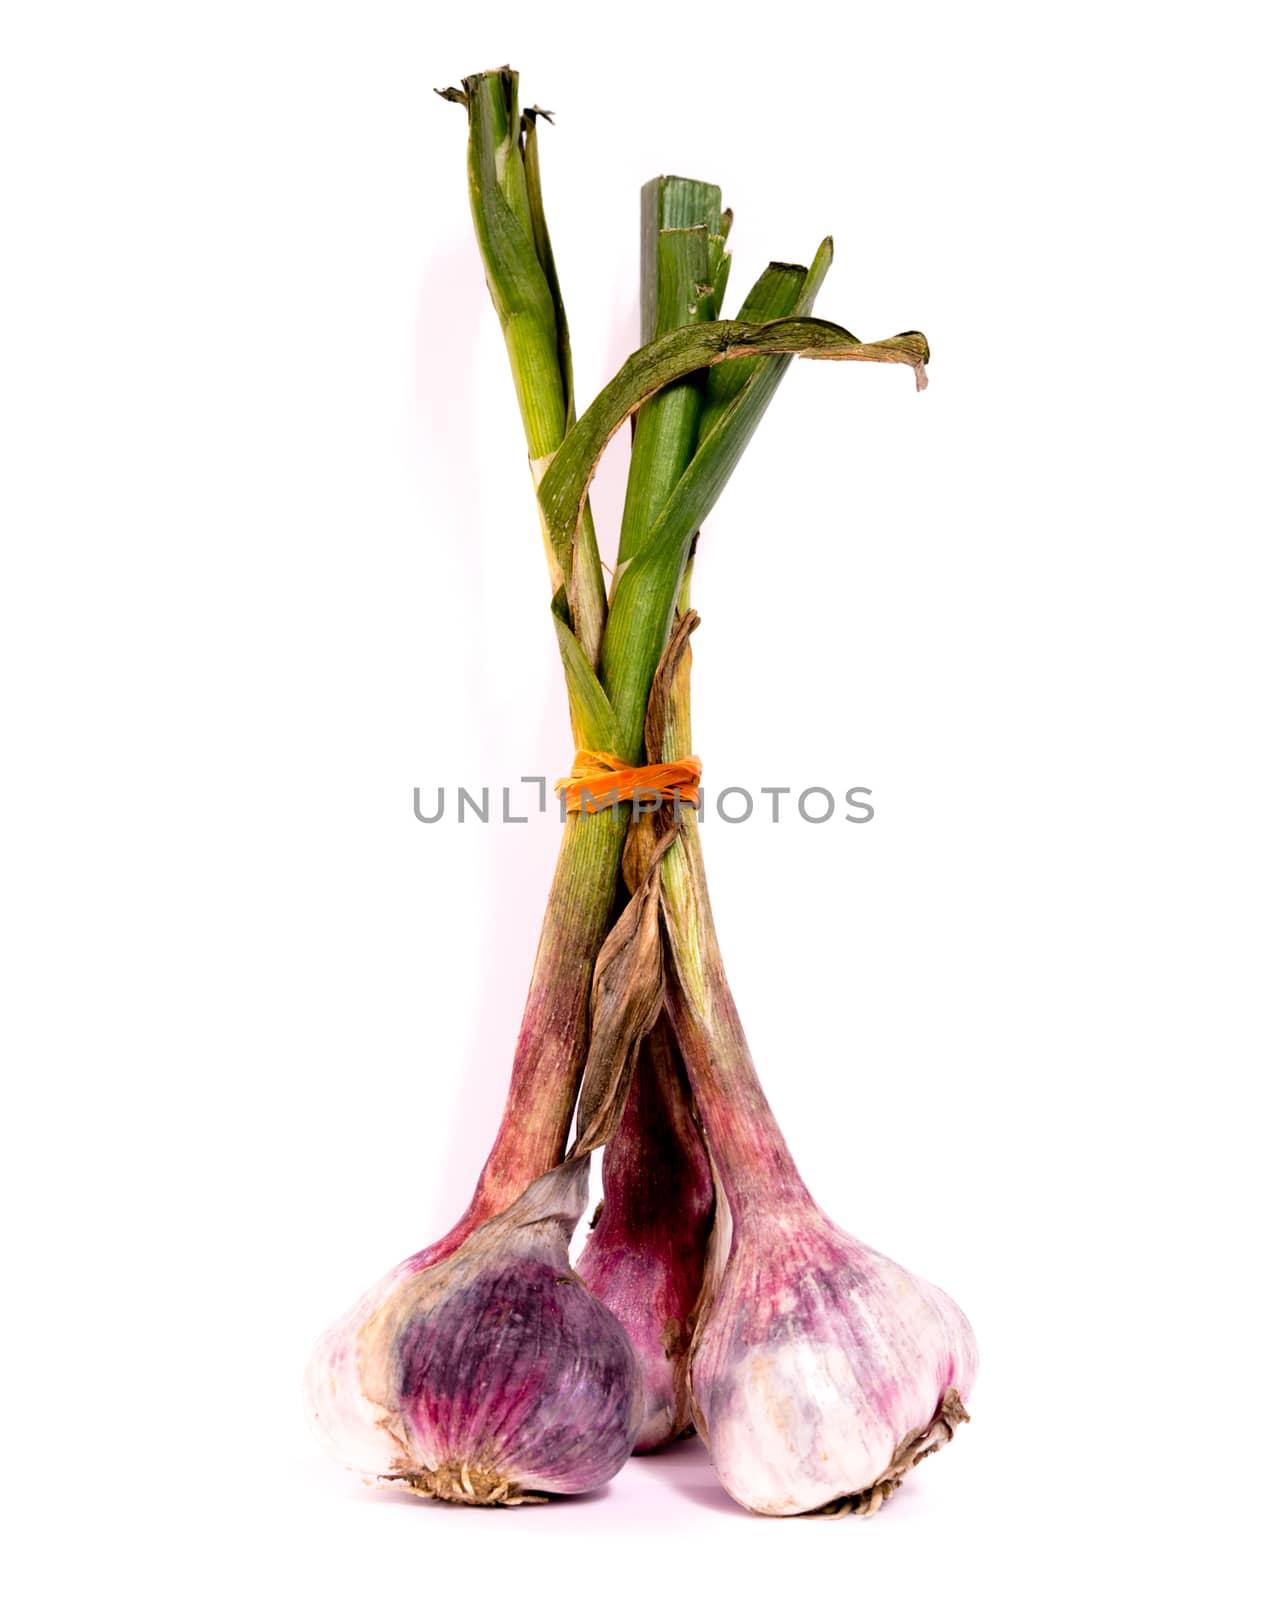 Close-up view a bunch of fresh organic garlic bulbs isolated on white background. They are freshly picked from home growth garden in Vietnam. Food concept with clipping path and copyspace.